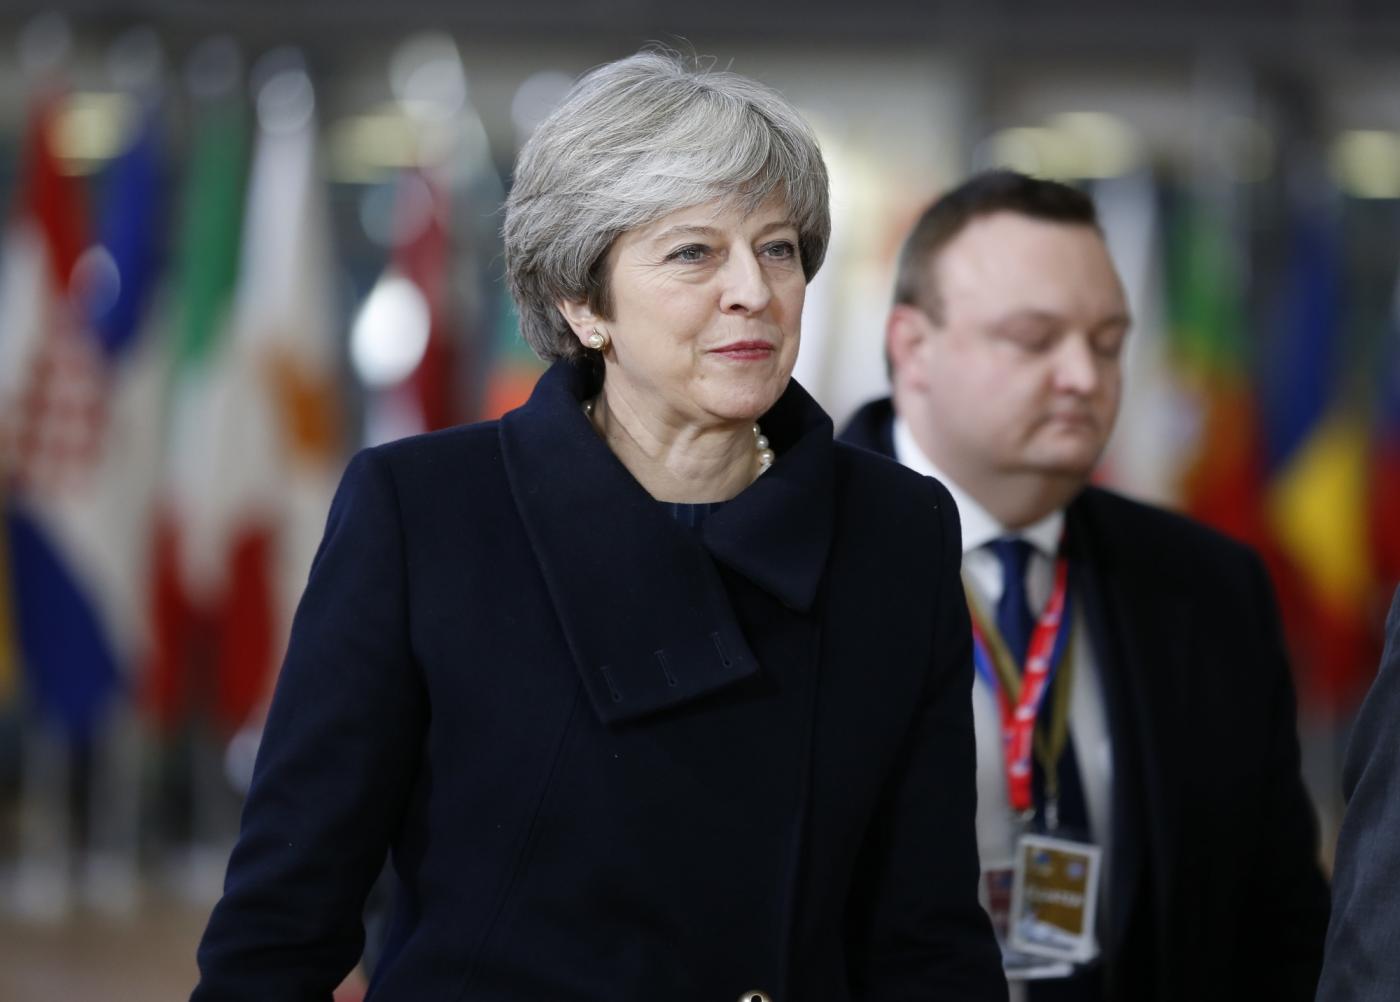 BRUSSELS, Dec. 14, 2017 (Xinhua) -- British Prime Minister Theresa May arrives at the EU headquarters for an EU Summit in Brussels, Belgium, Dec. 14, 2017. (Xinhua/Ye Pingfan/IANS) by .